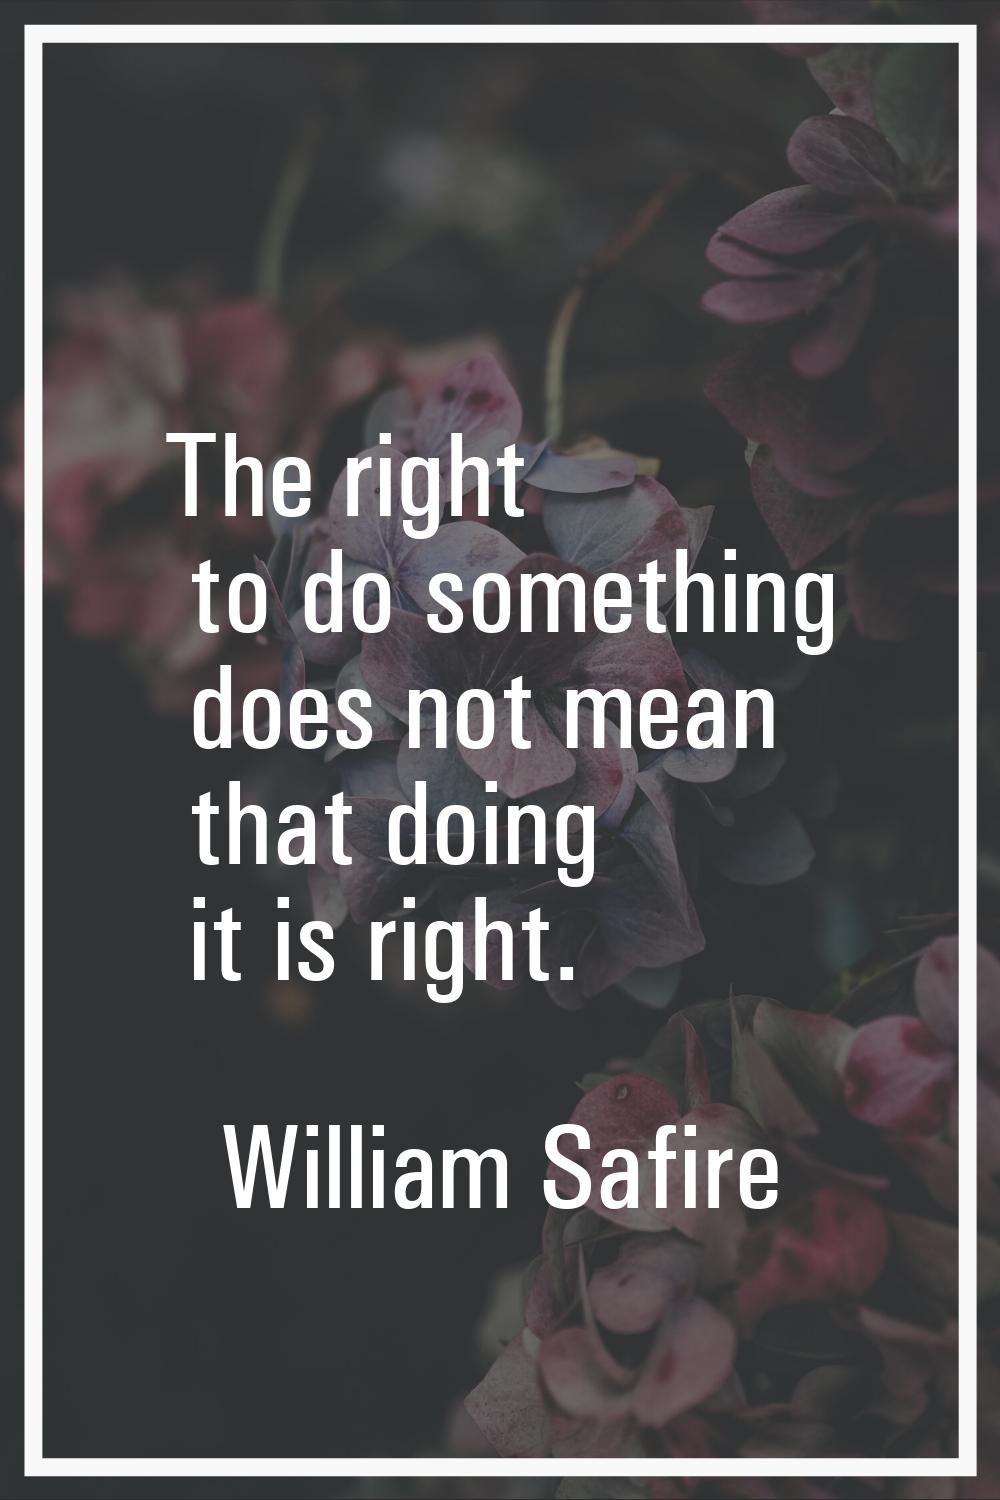 The right to do something does not mean that doing it is right.